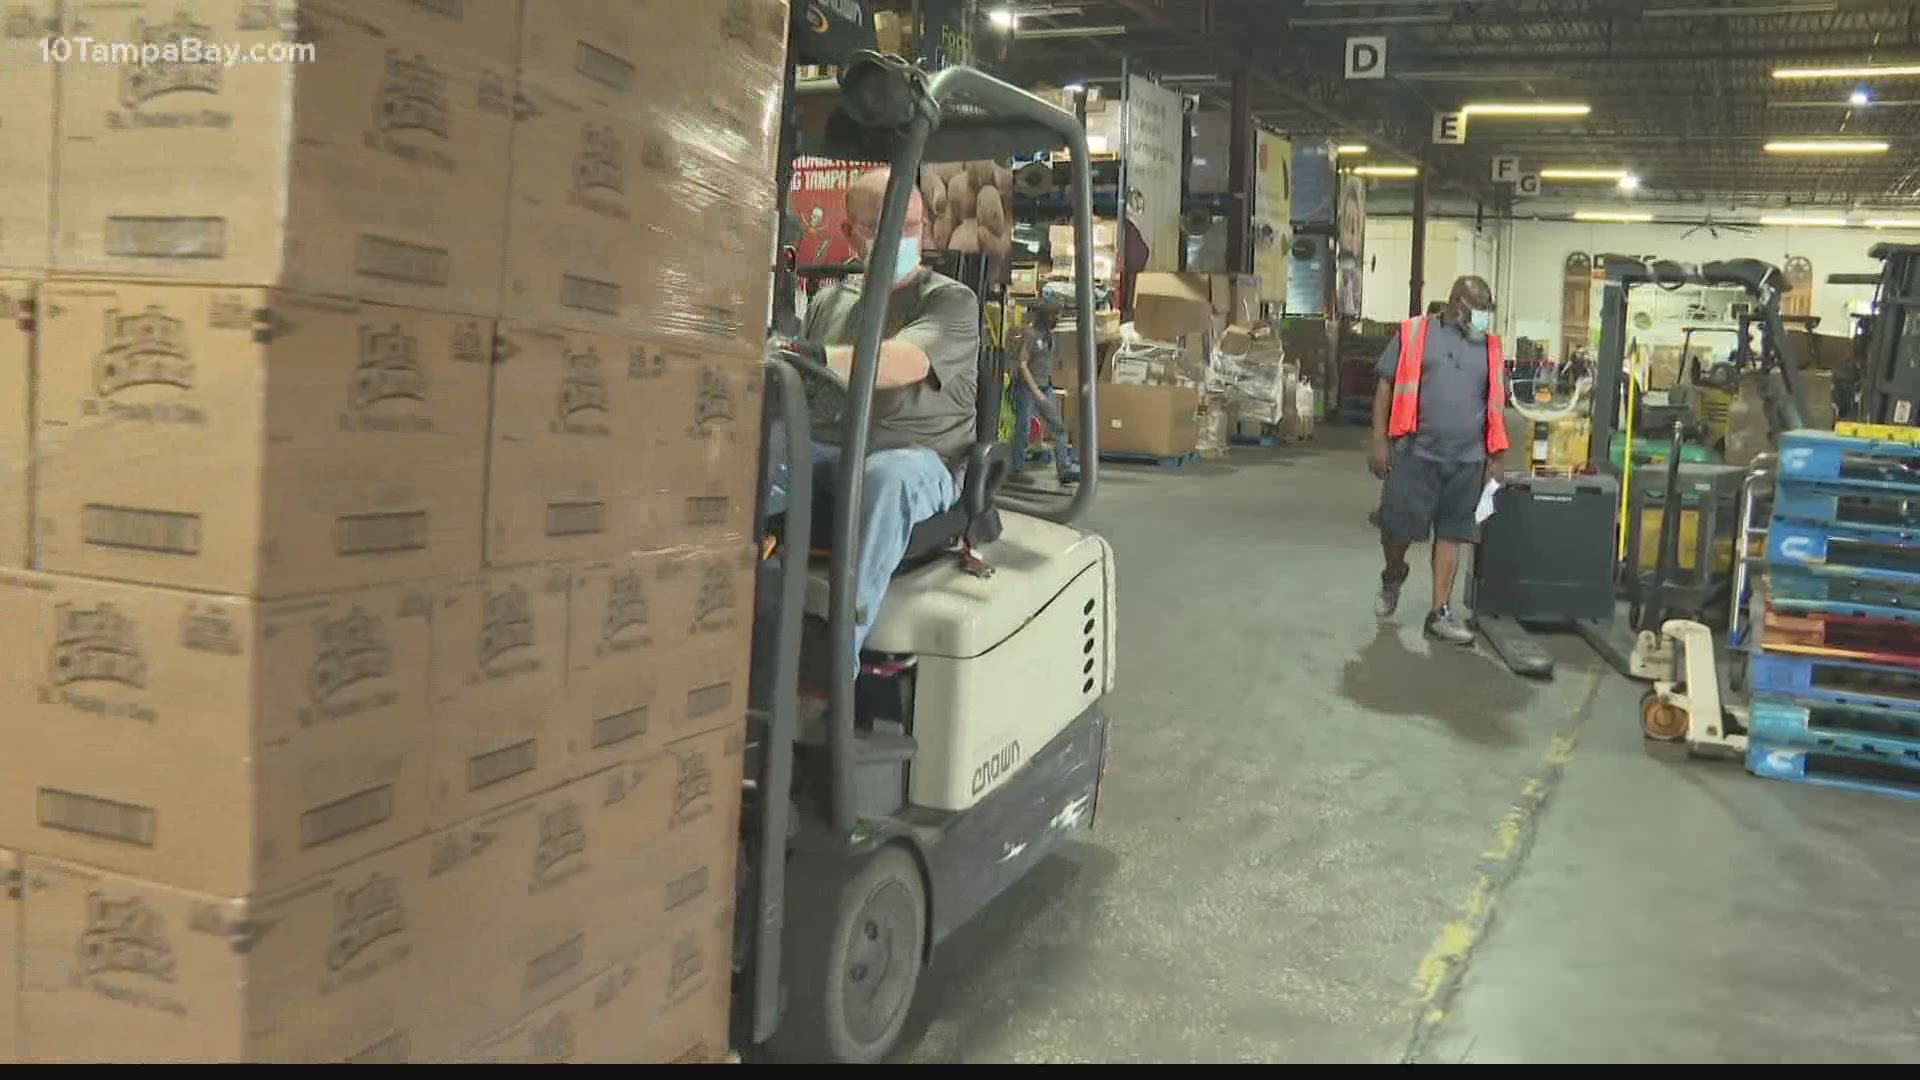 The food was dropped off at Feeding Tampa Bay's warehouse on Wednesday.